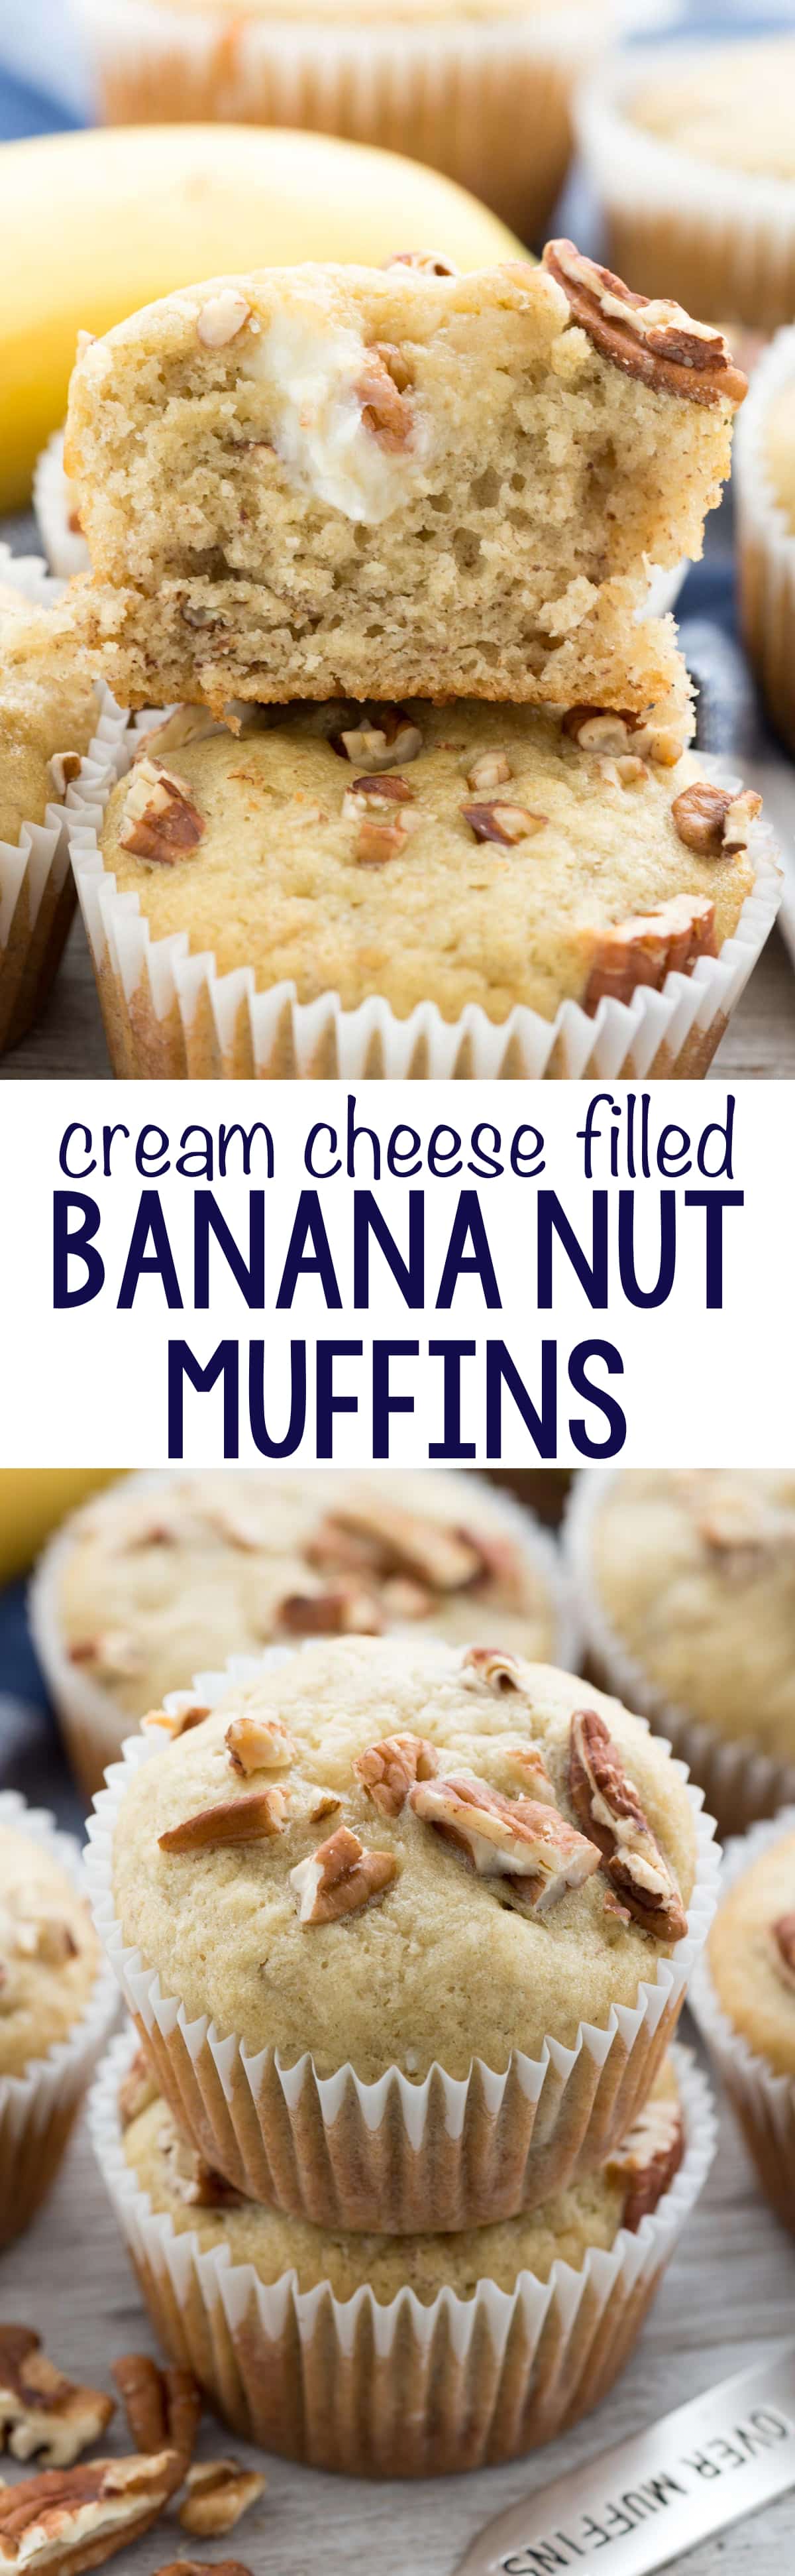 Cream Cheese Banana Muffins - this EASY banana muffin recipe is my favorite and it's FULL of a sweet cream cheese mixture! Everyone loves these muffins!